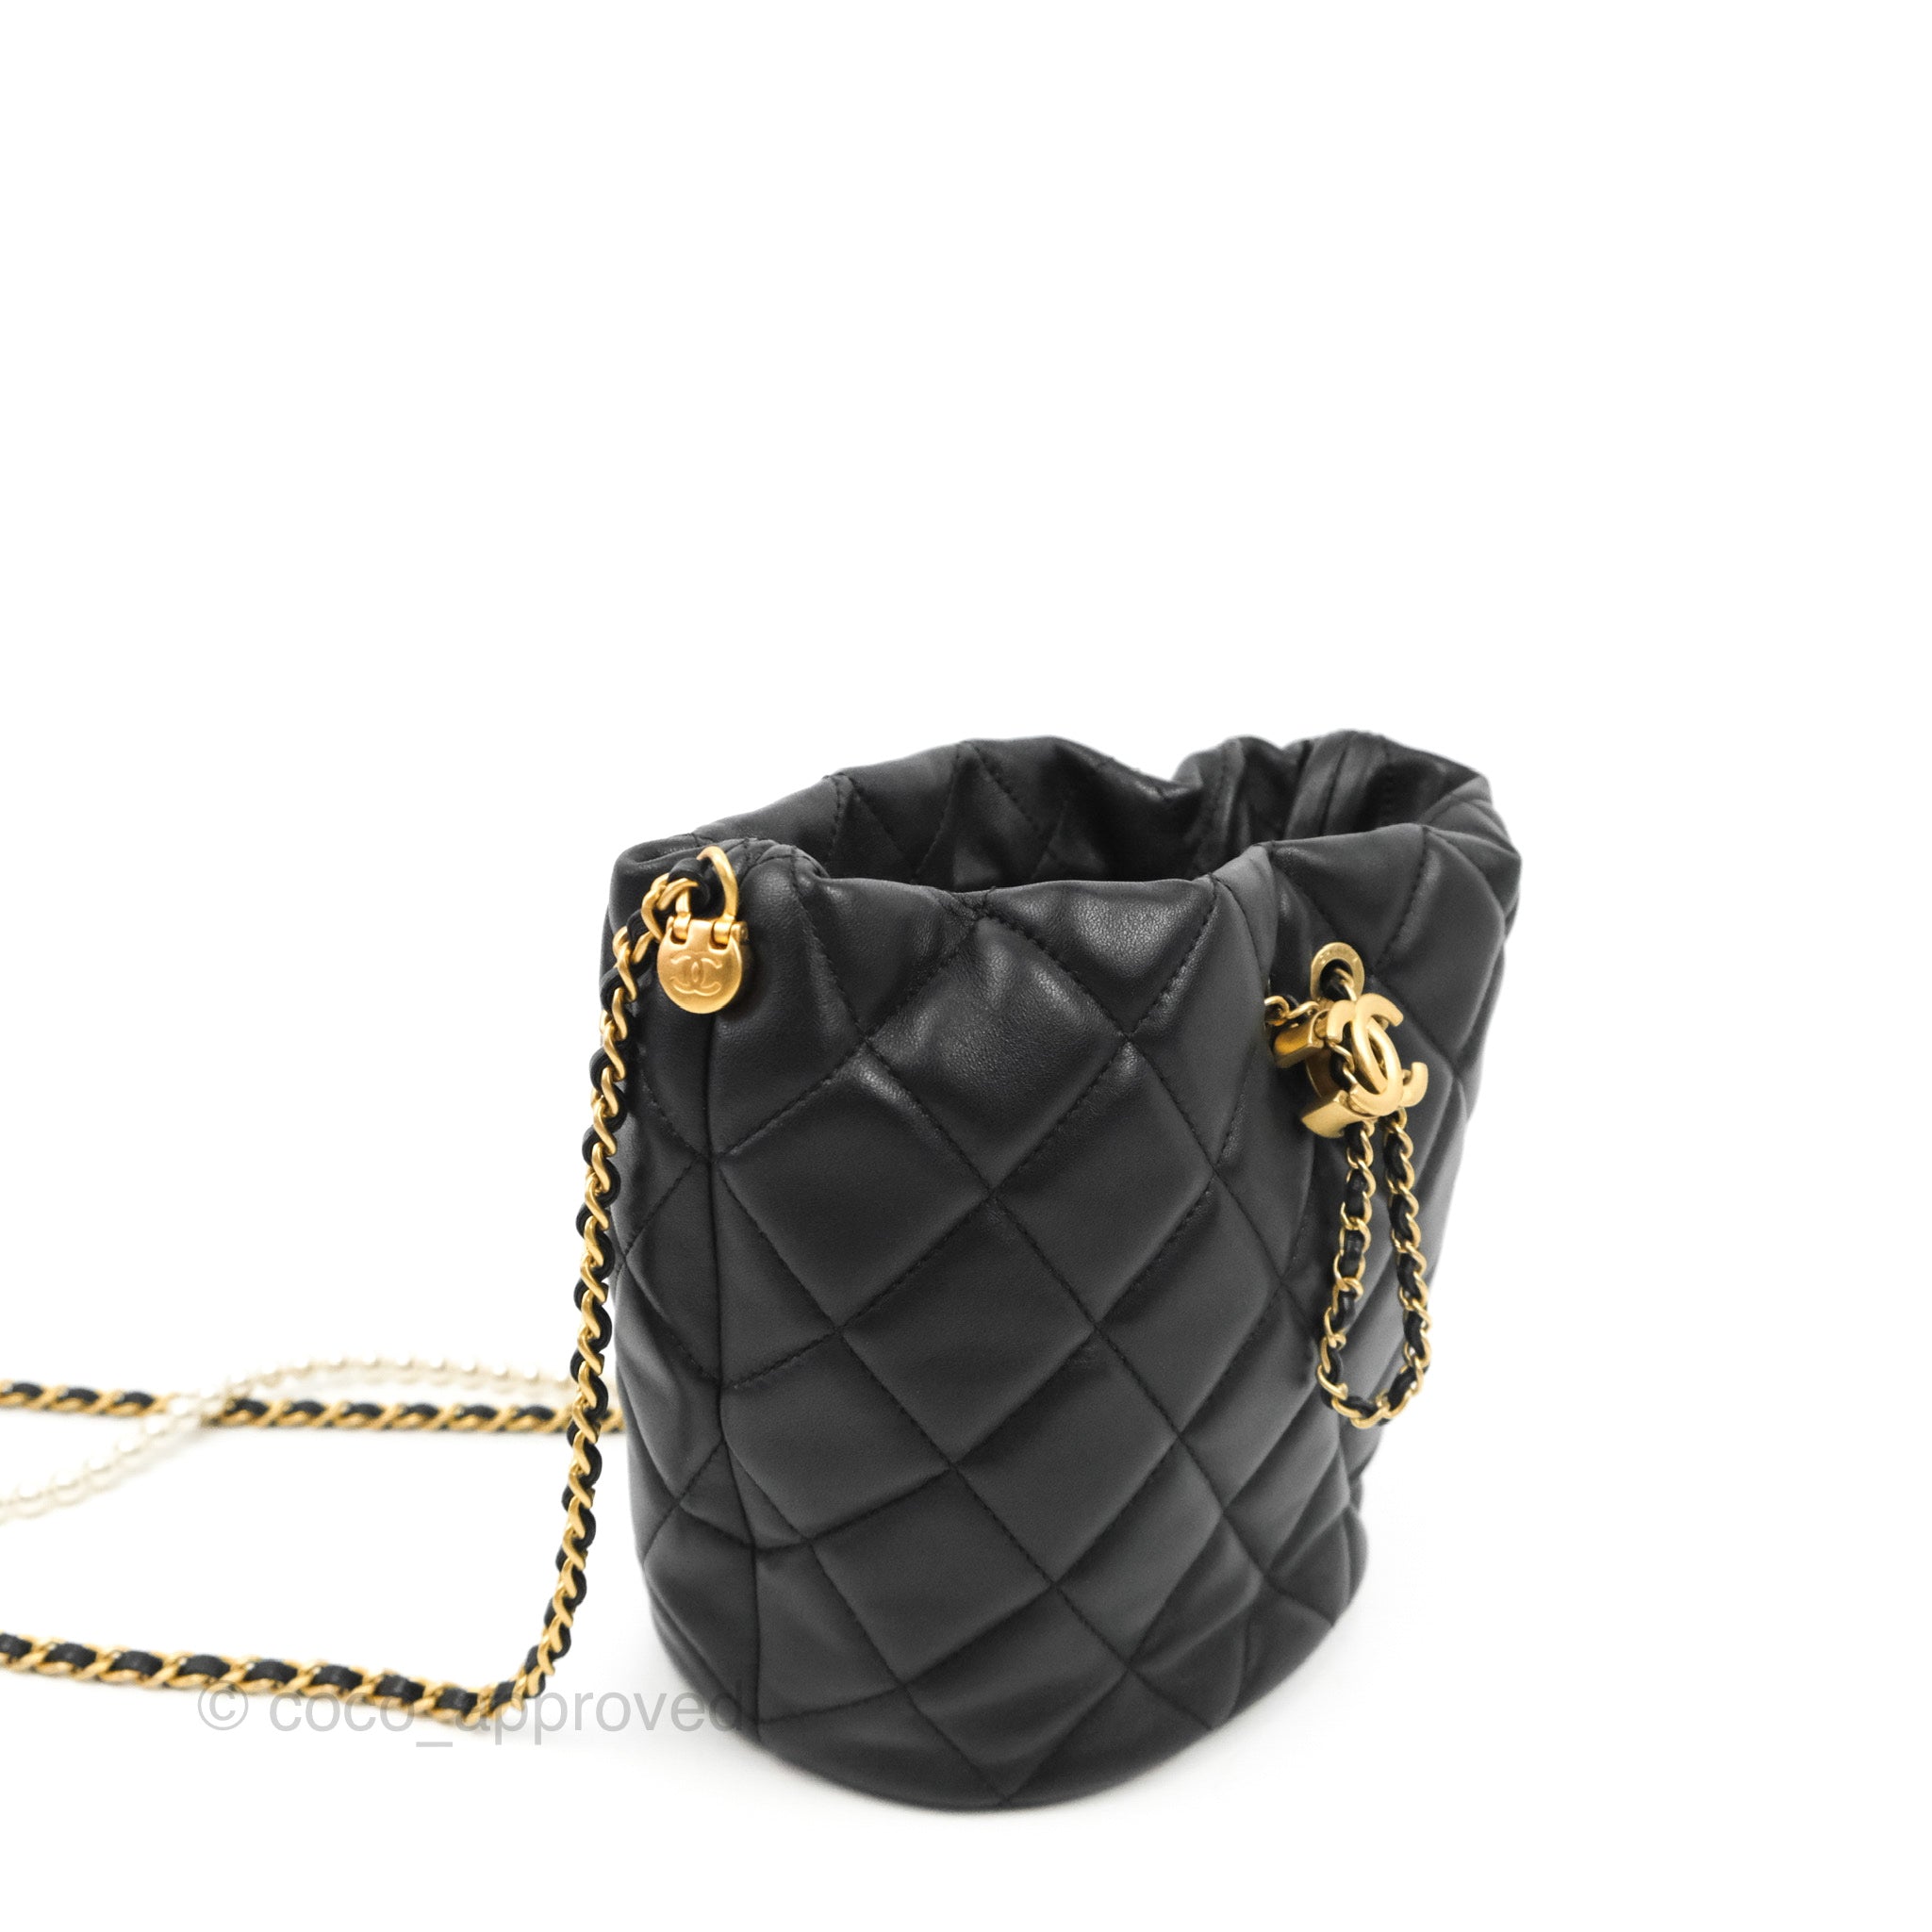 CHANEL, Bags, Chanel Quilted Bucket Drawstring Bag